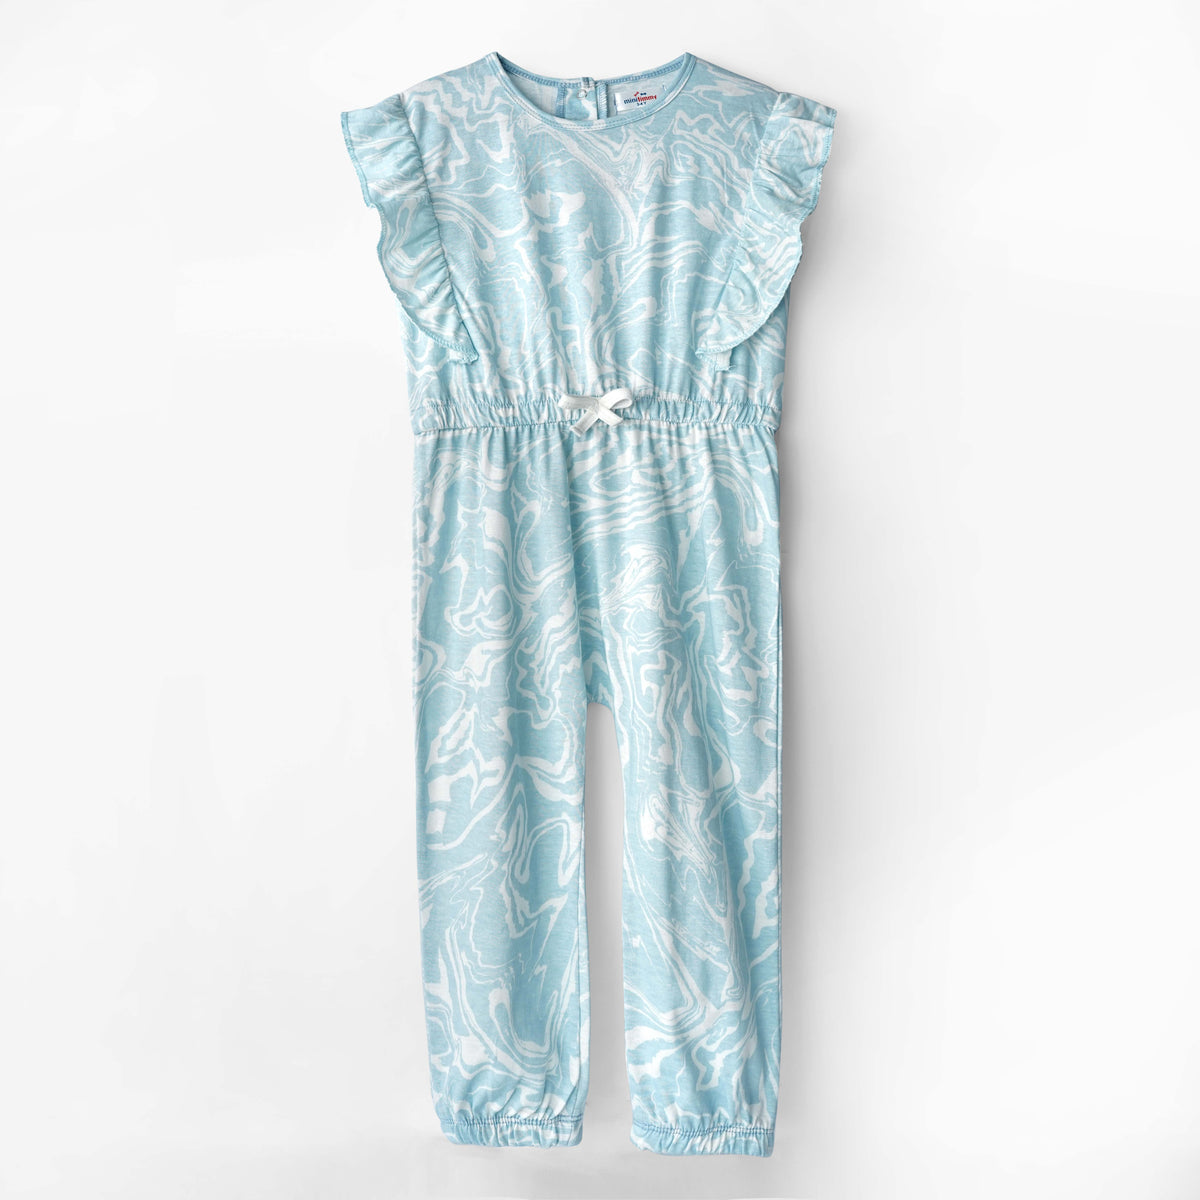 Girls All-Over Printed Soft Cotton Sky Blue Frill Jumpsuit